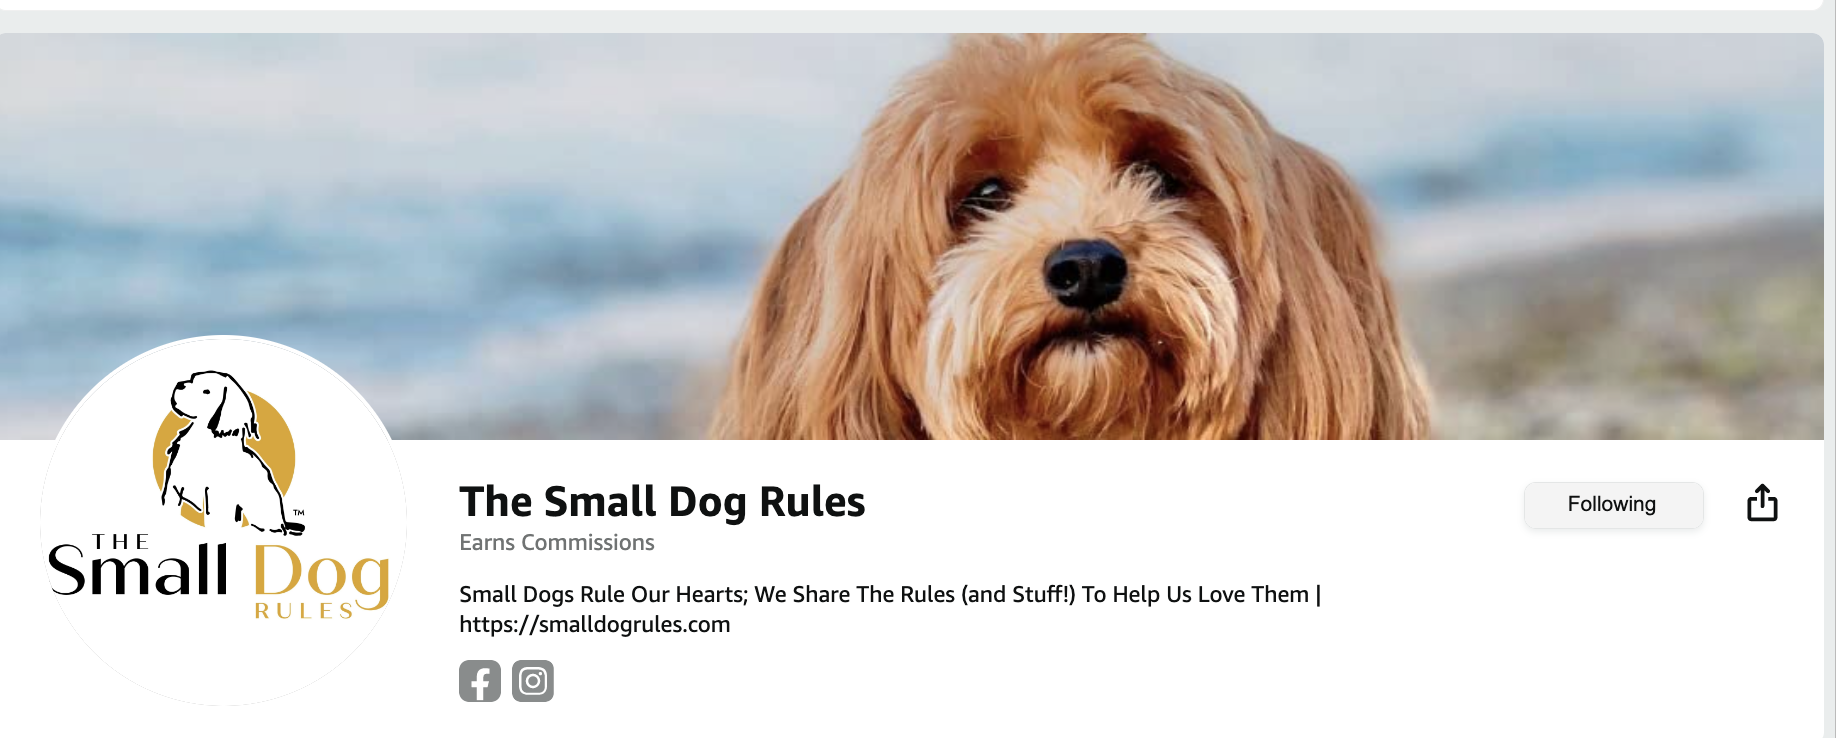 Amazon storefront for The Small Dog Rules with picture of red Havanese on beach and logo